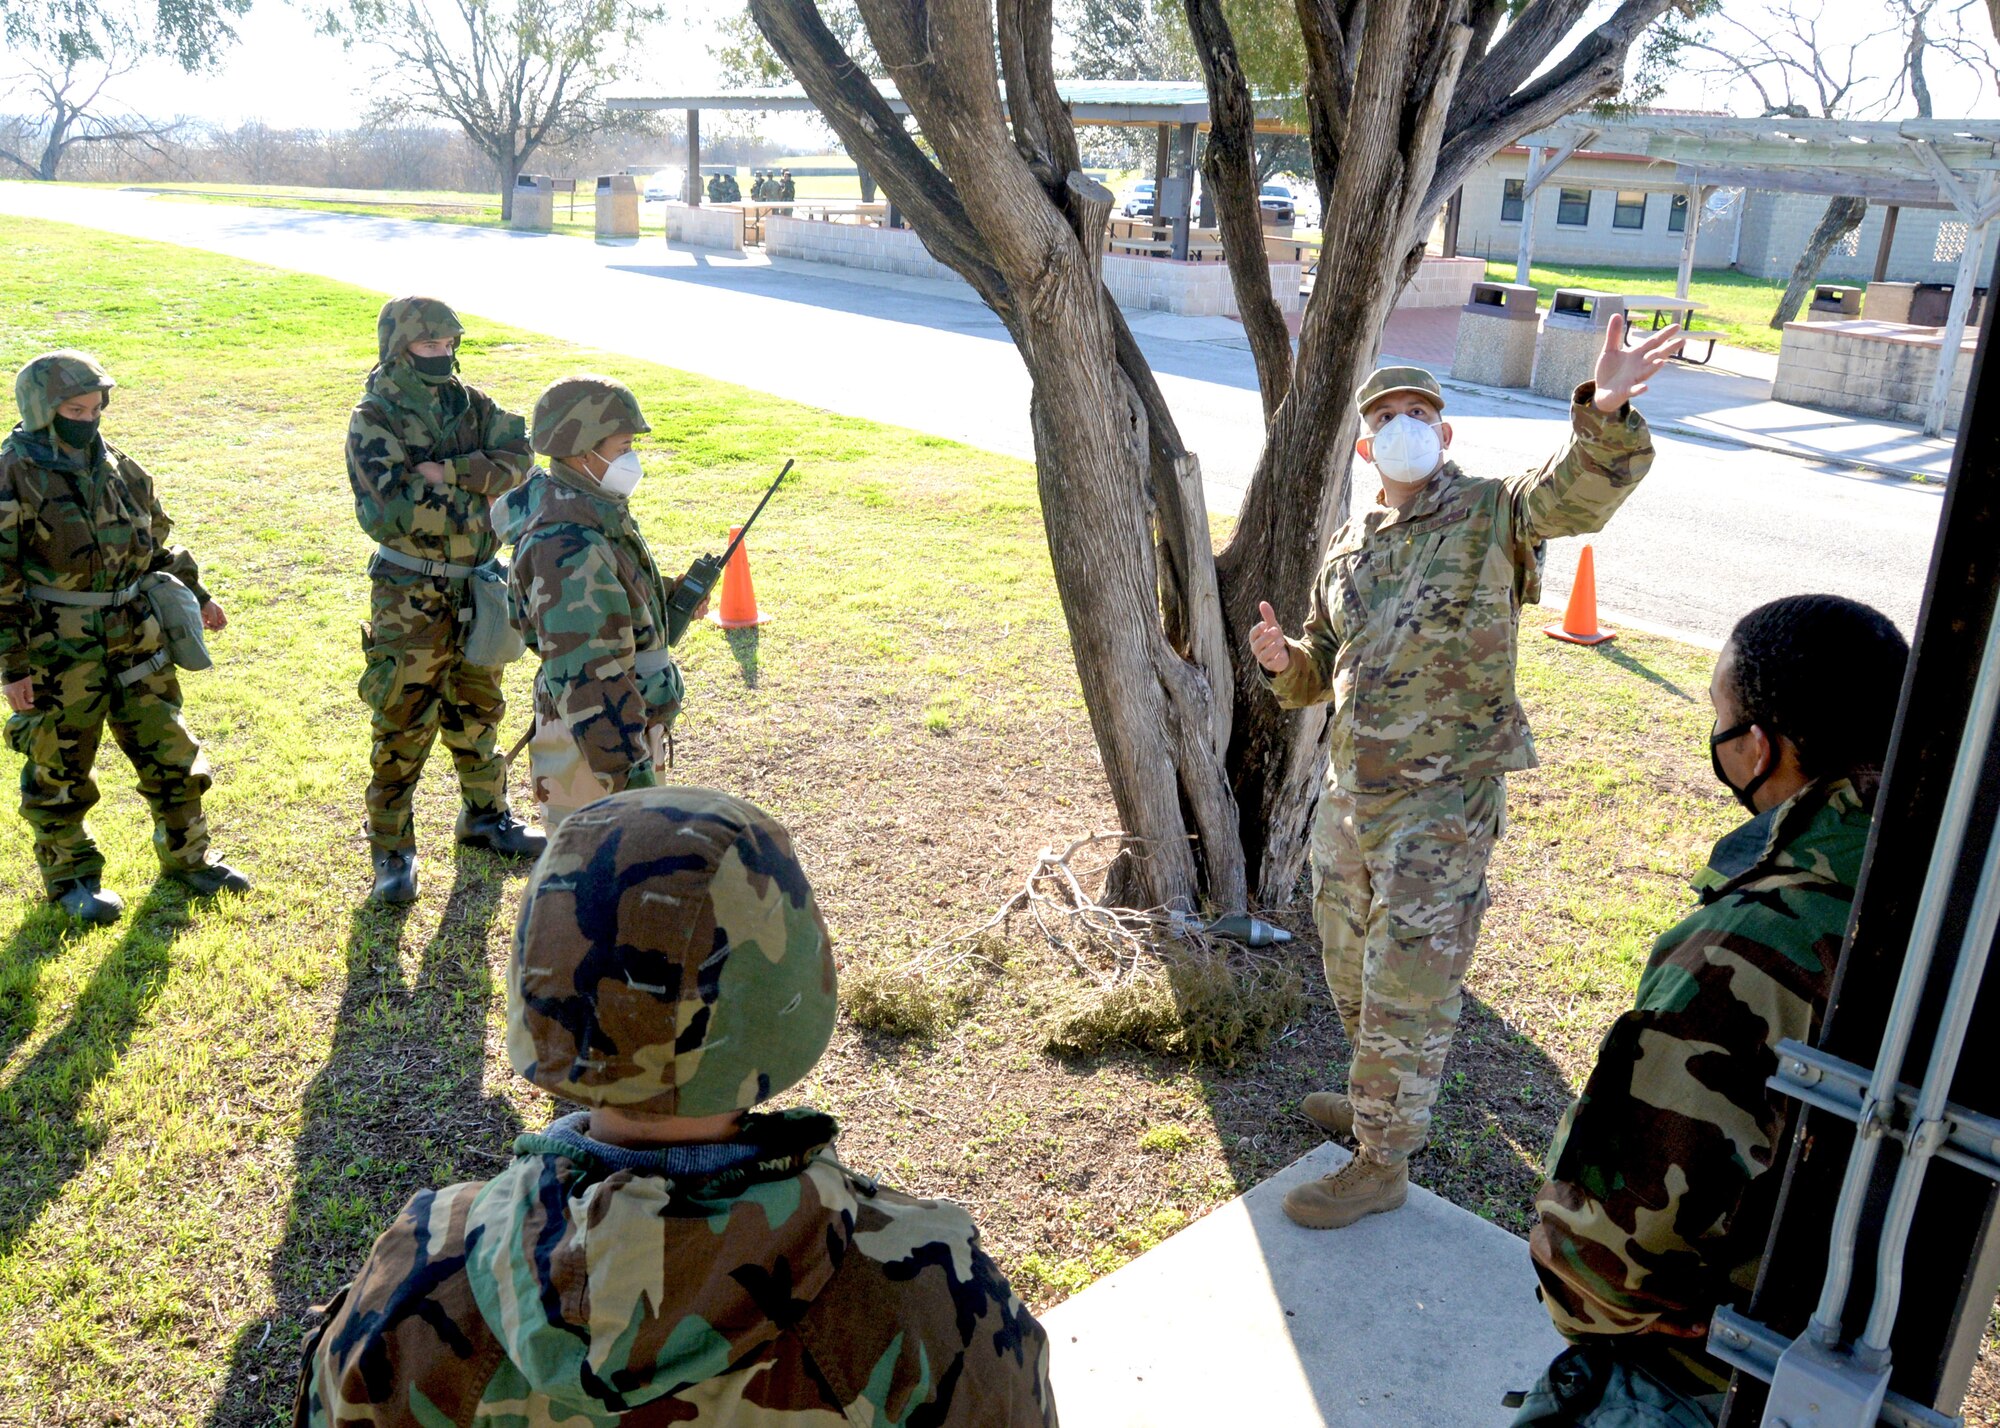 Tech. Sgt. William Bonner, 74th Aerial Port Squadron, instructs Reserve Citizen Airmen in the 433rd Airlift Wing during a simulated post-attack reconnaissance sweep March 6, 2021, at Joint Base San Antonio-Lackland, Texas. The Airmen received real-world training and practice in wearing different levels of mission-oriented protective posture gear, while performing sweeps and transporting cargo. (U.S. Air Force photo by Tech. Sgt. Samantha Mathison)